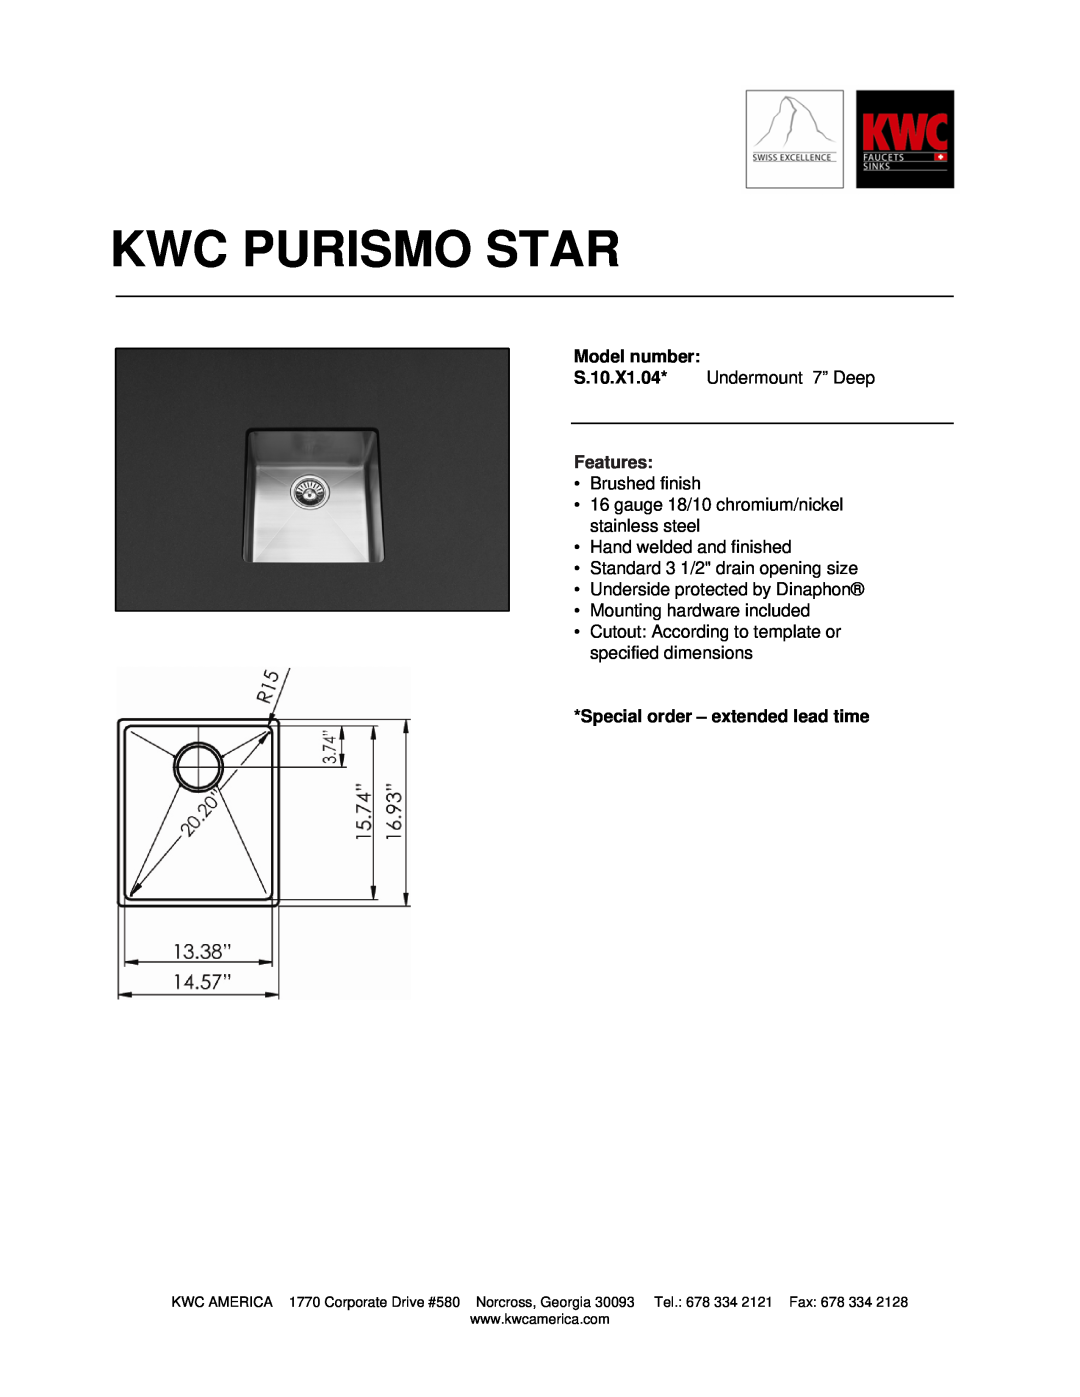 KWC S.10.X1.04* dimensions Kwc Purismo Star, Model number, Features, Special order - extended lead time 